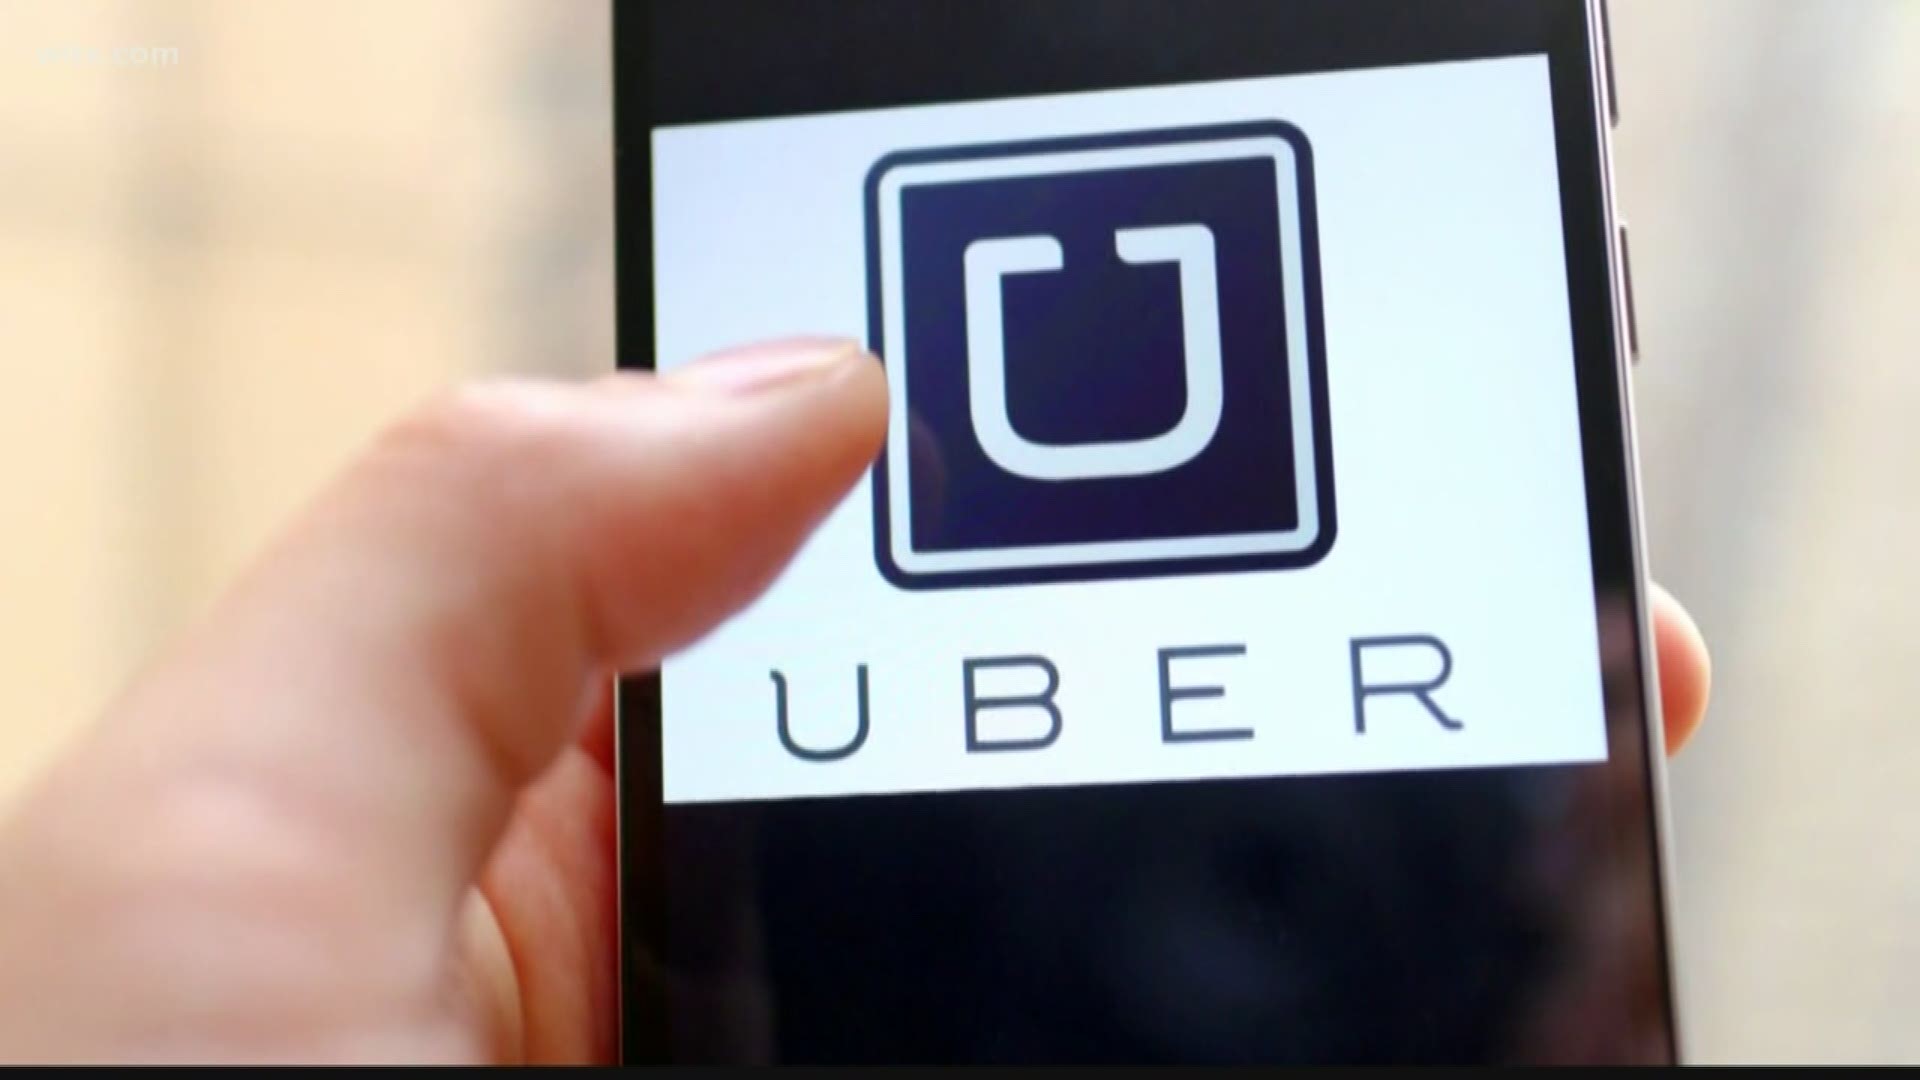 The Samantha Josephson ride sharing safety act took effect in South Carolina over the weekend.